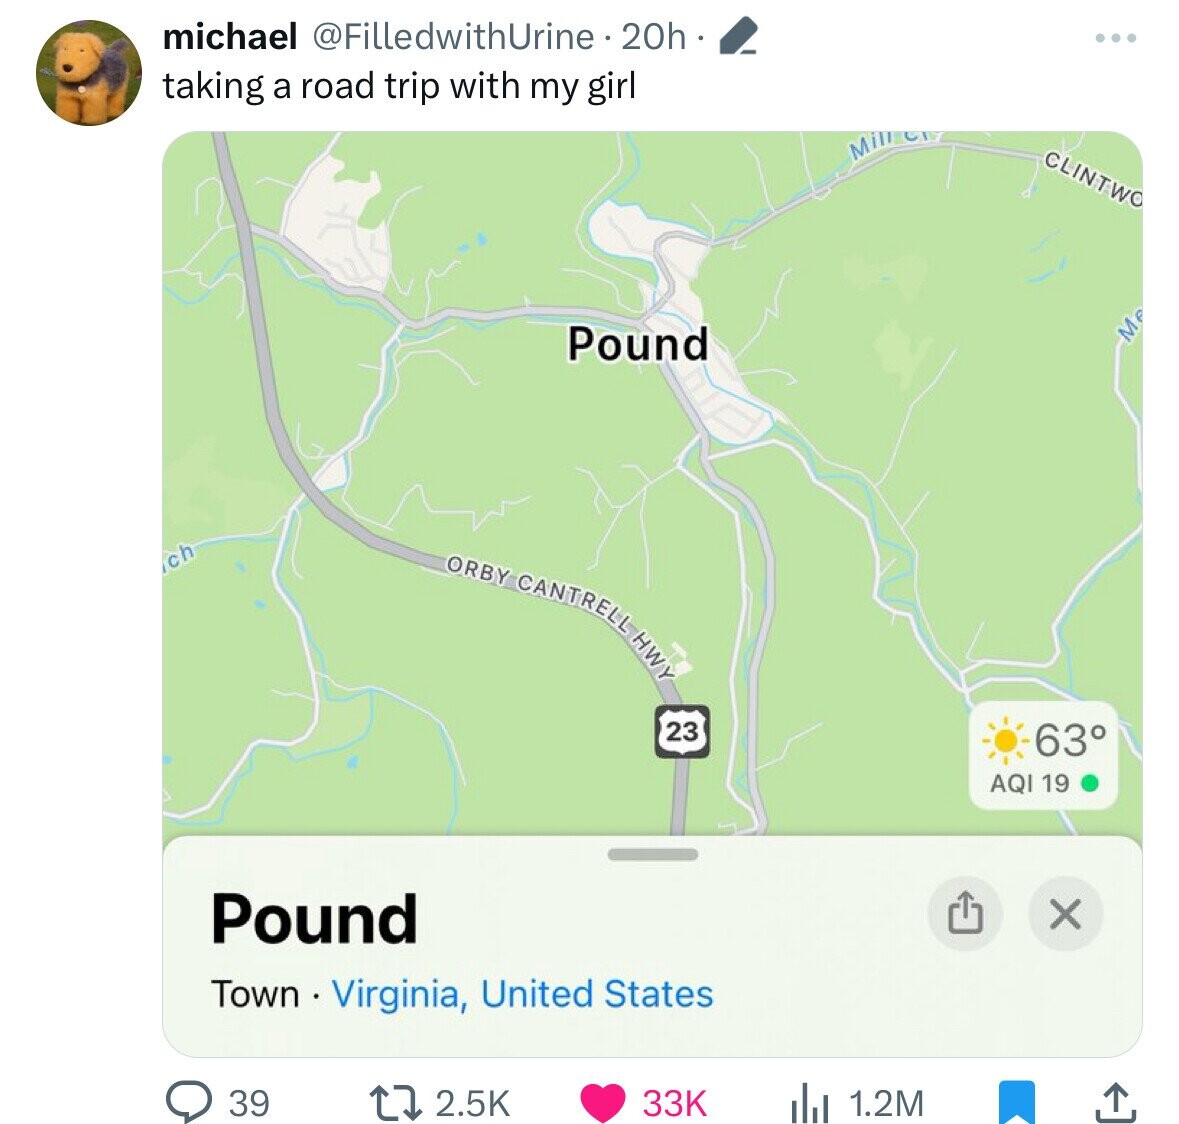 ch michael Urine 20h. taking a road trip with my girl Pound Rell Hwy Orby Cantrell 23 Pound Town Virginia, United States 39 Mill C G 63 Aqi 19 X 33K Il 1.2M Clintwo Me